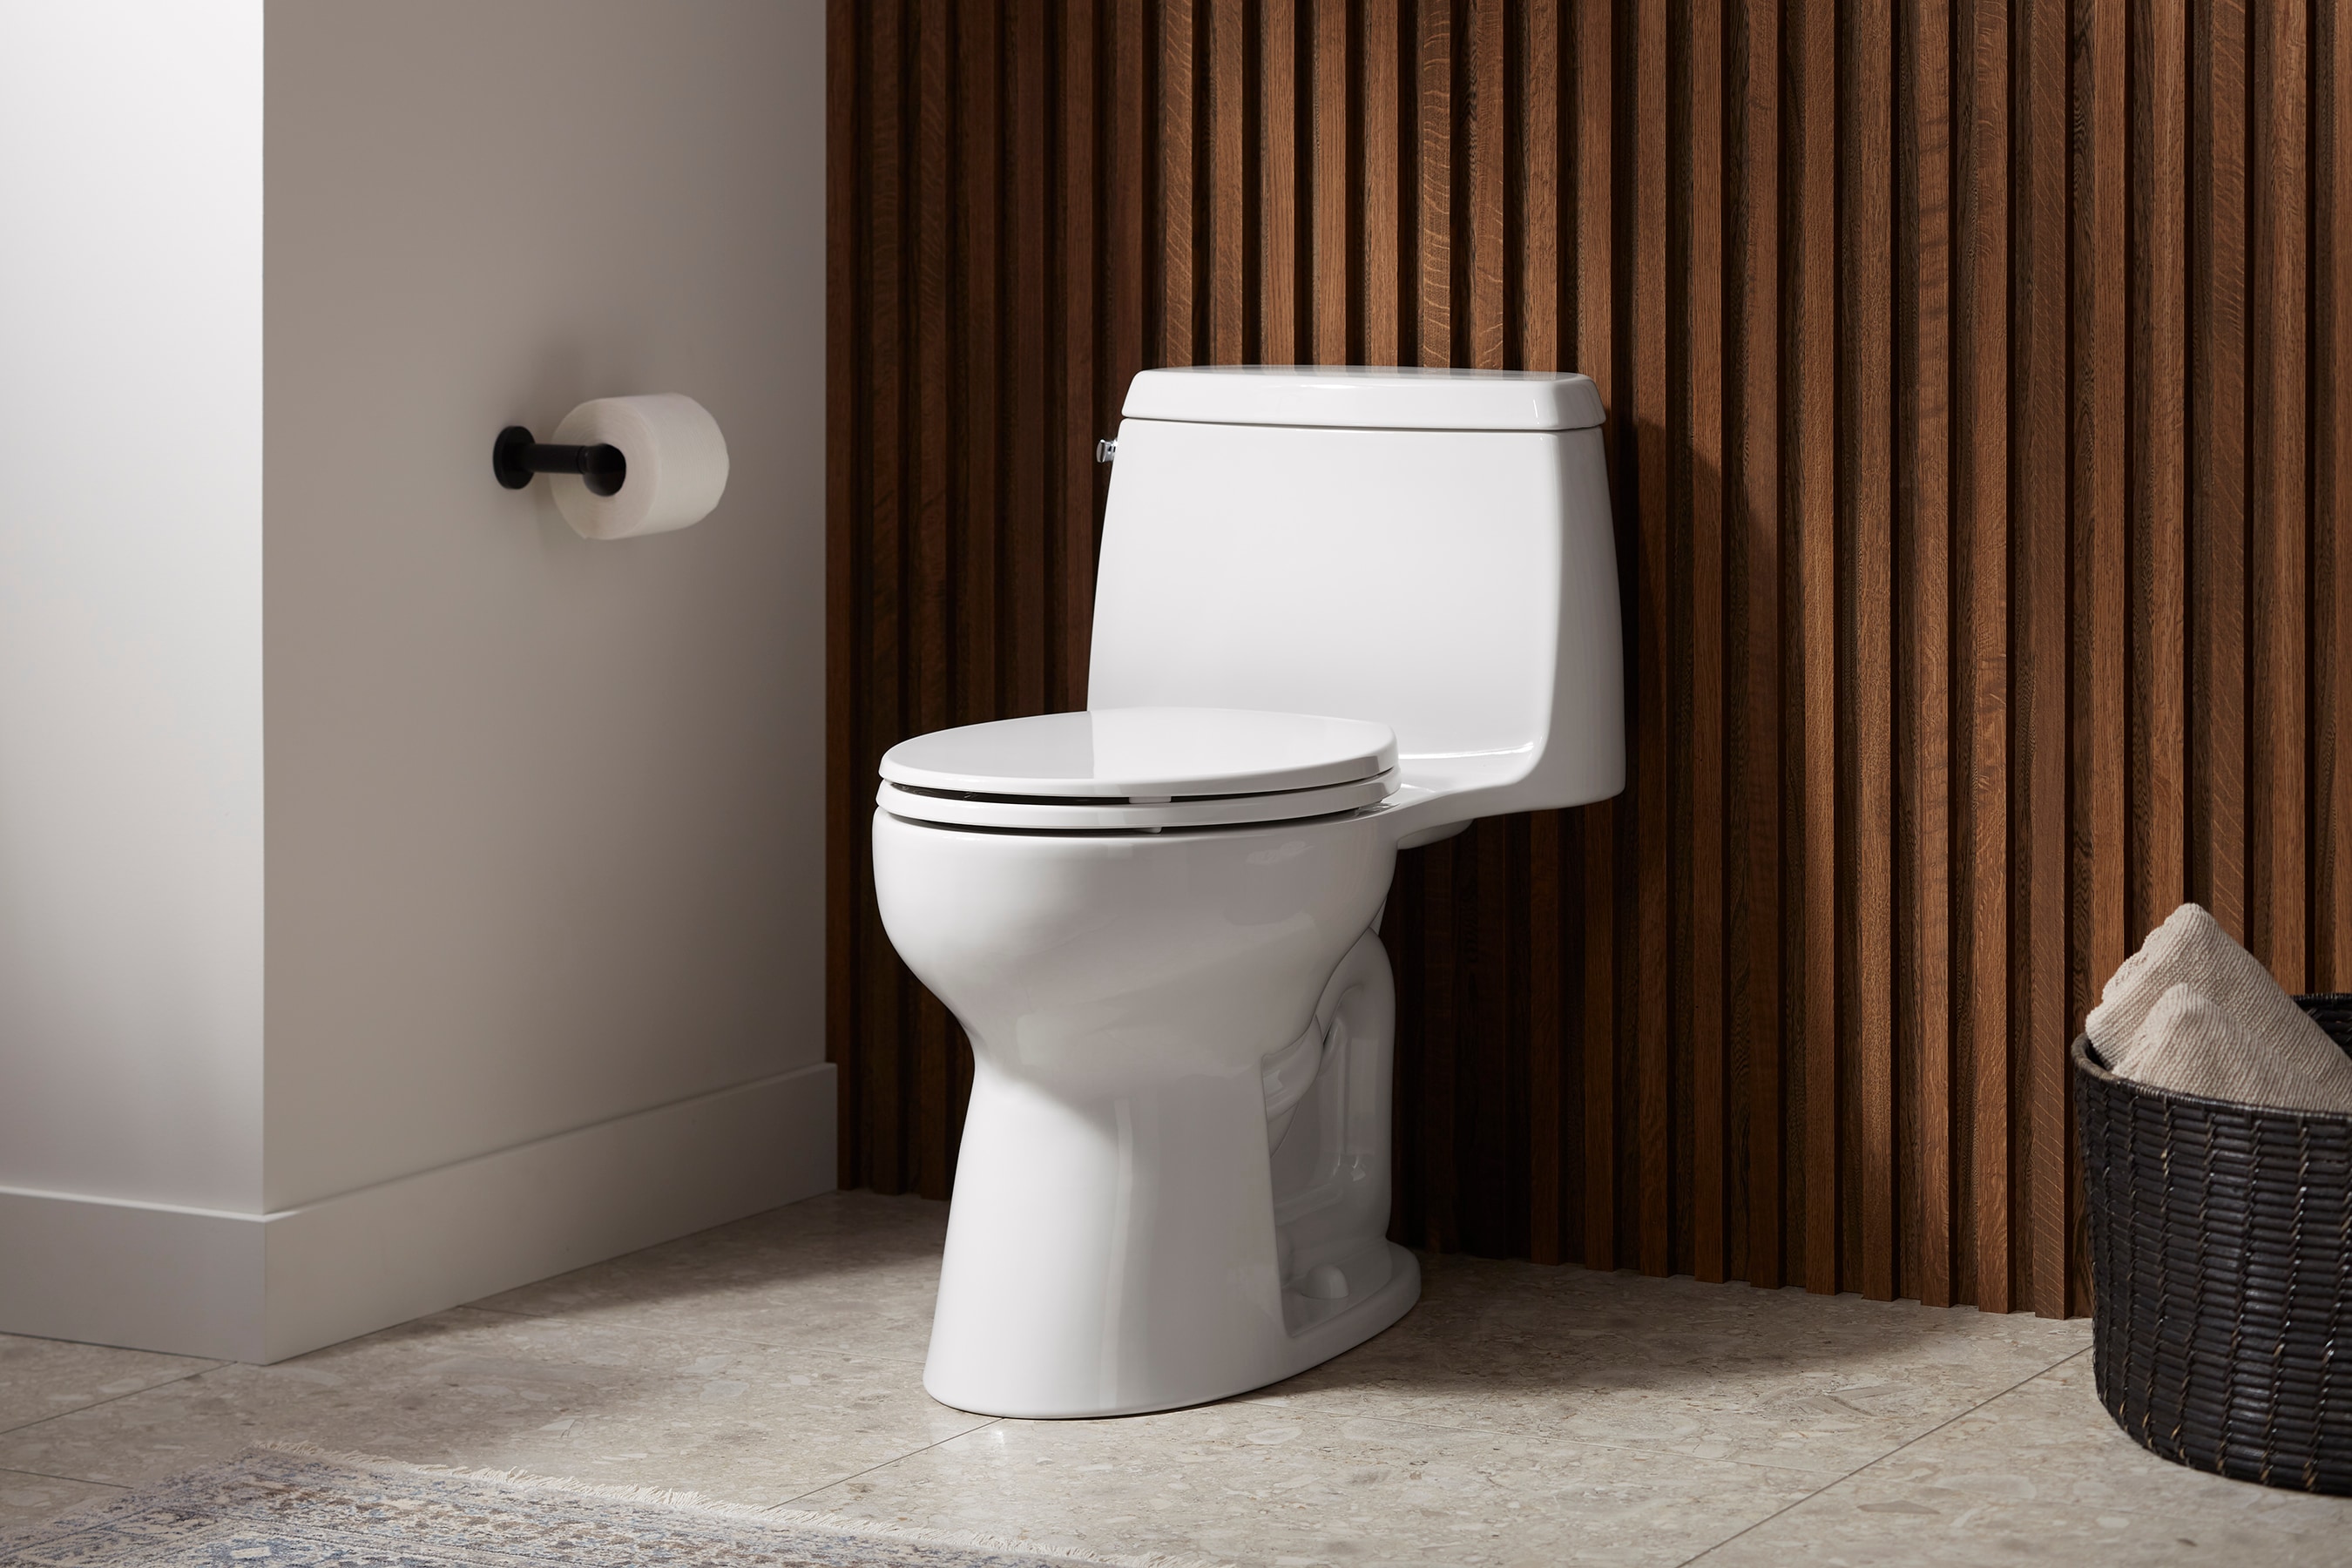 Elongated WaterSense Toilets Toilet Chair Rosa Close in department White Rough-In Santa the Soft 12-in Height KOHLER at 1.28-GPF